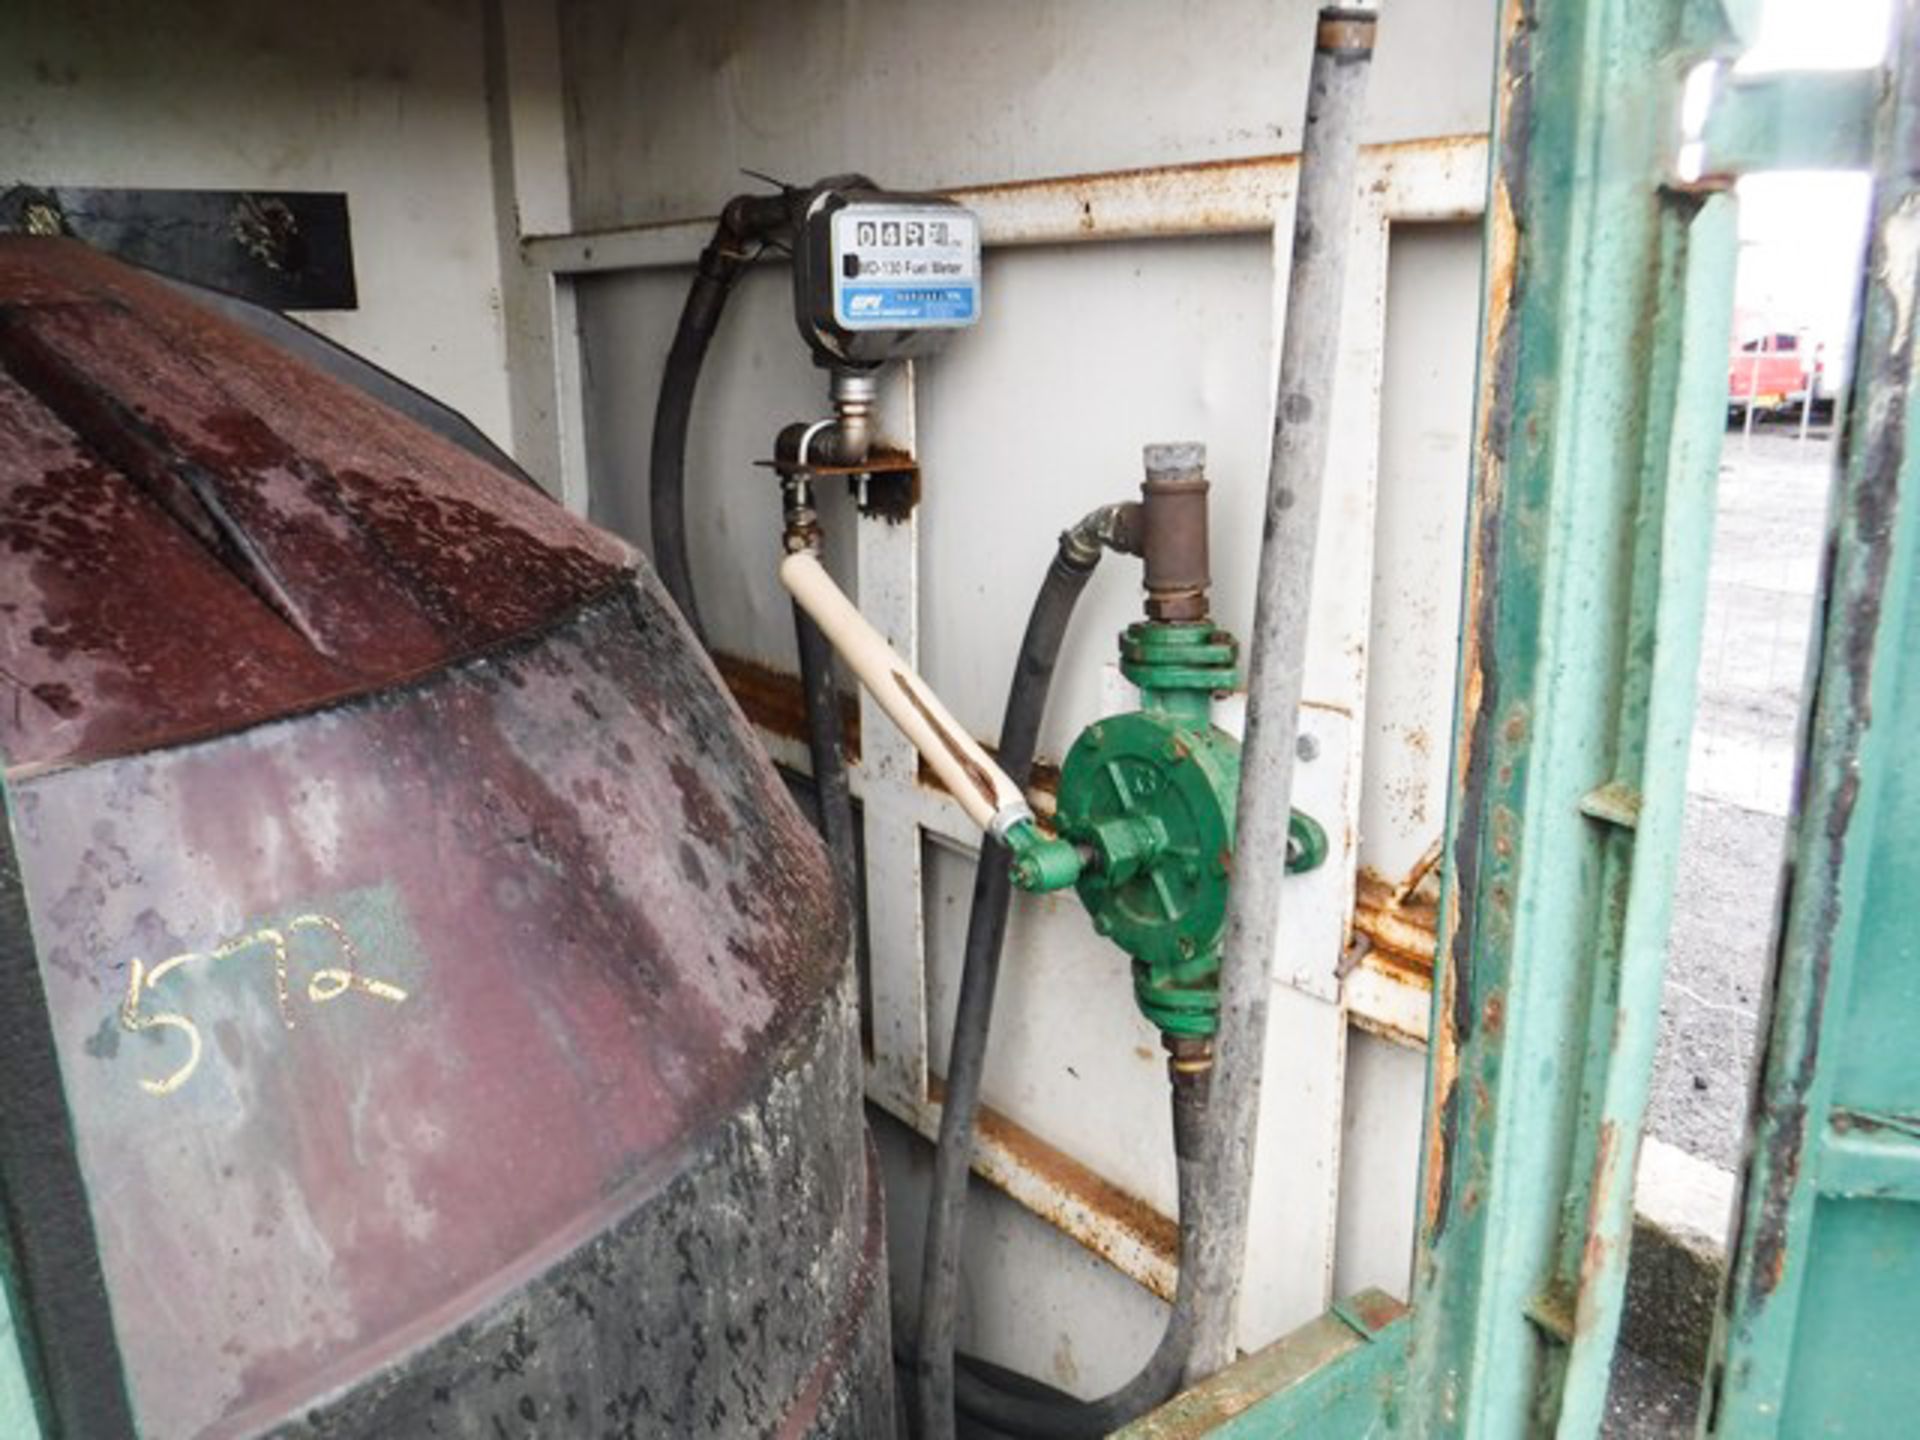 7FT X 6FT SECURE CONTAINER C/W 2000L BUNDED DIESEL TANK, HAND PUMP, METER & DISCHARGE NOZZLE - Image 4 of 5